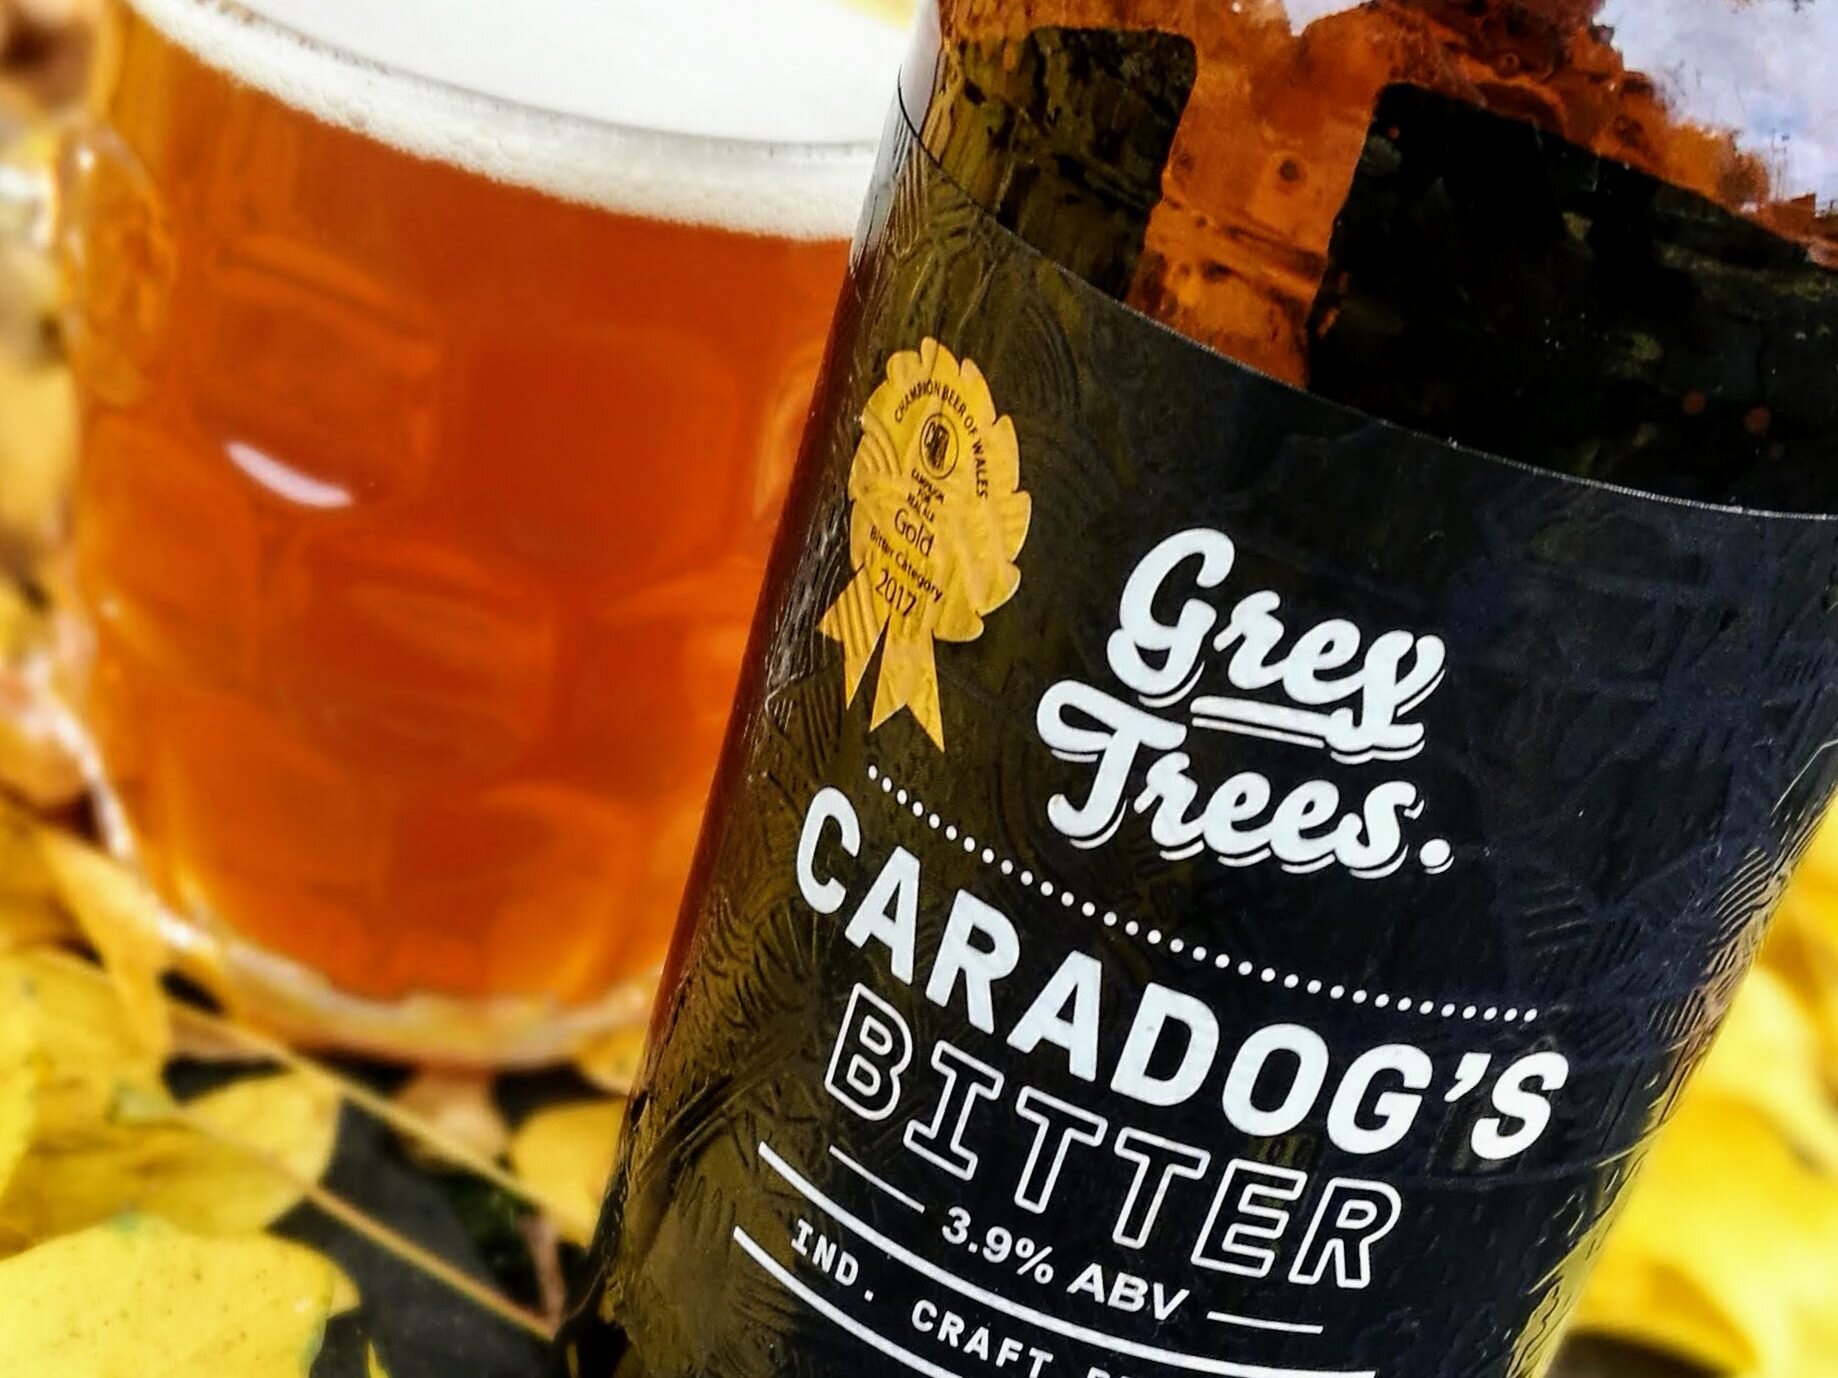 The Beer Yeti Grey Trees Brewery, Caradog's Bitter review